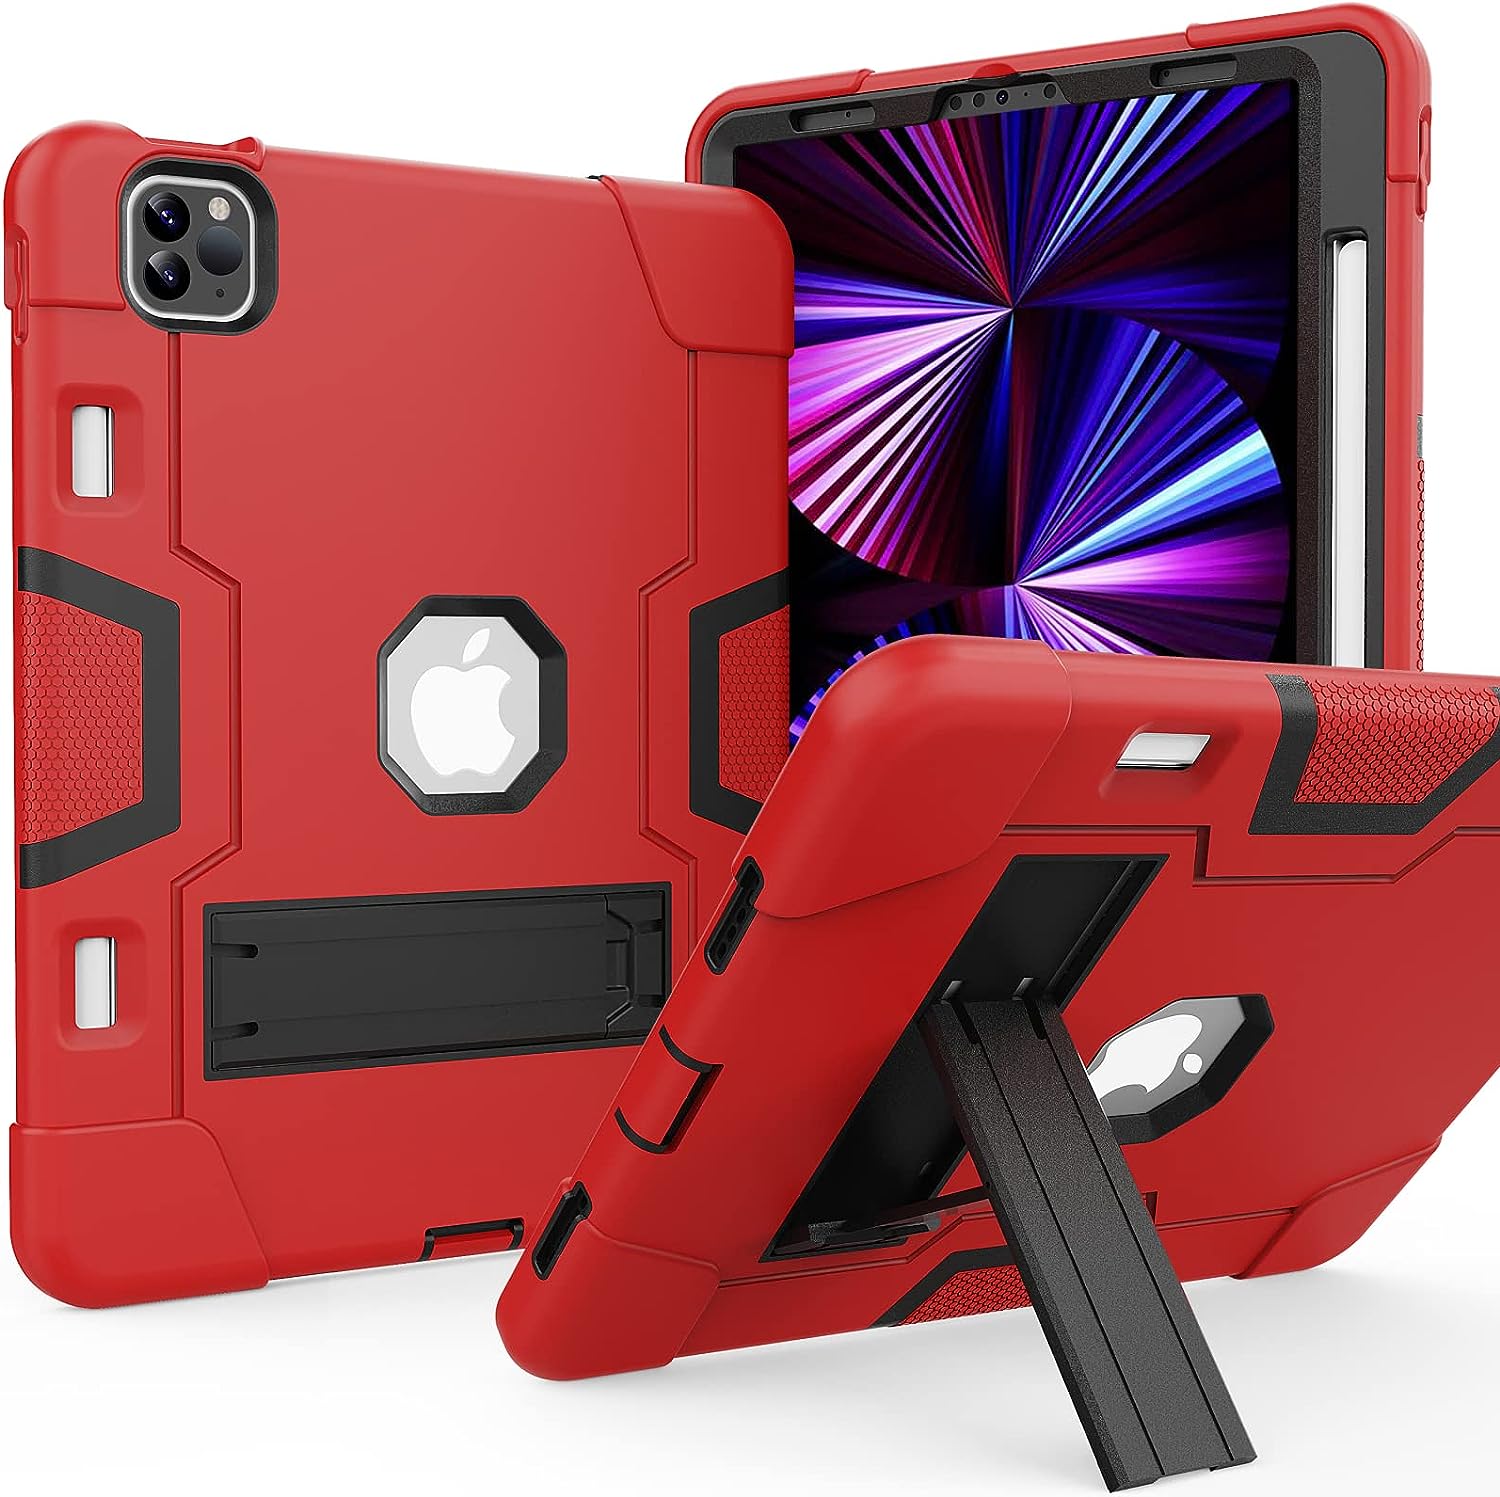 iPad Air 4th Generation 10.9 inch Case Red & Black with Kickstand RRP 10.83 CLEARANCE XL 7.99